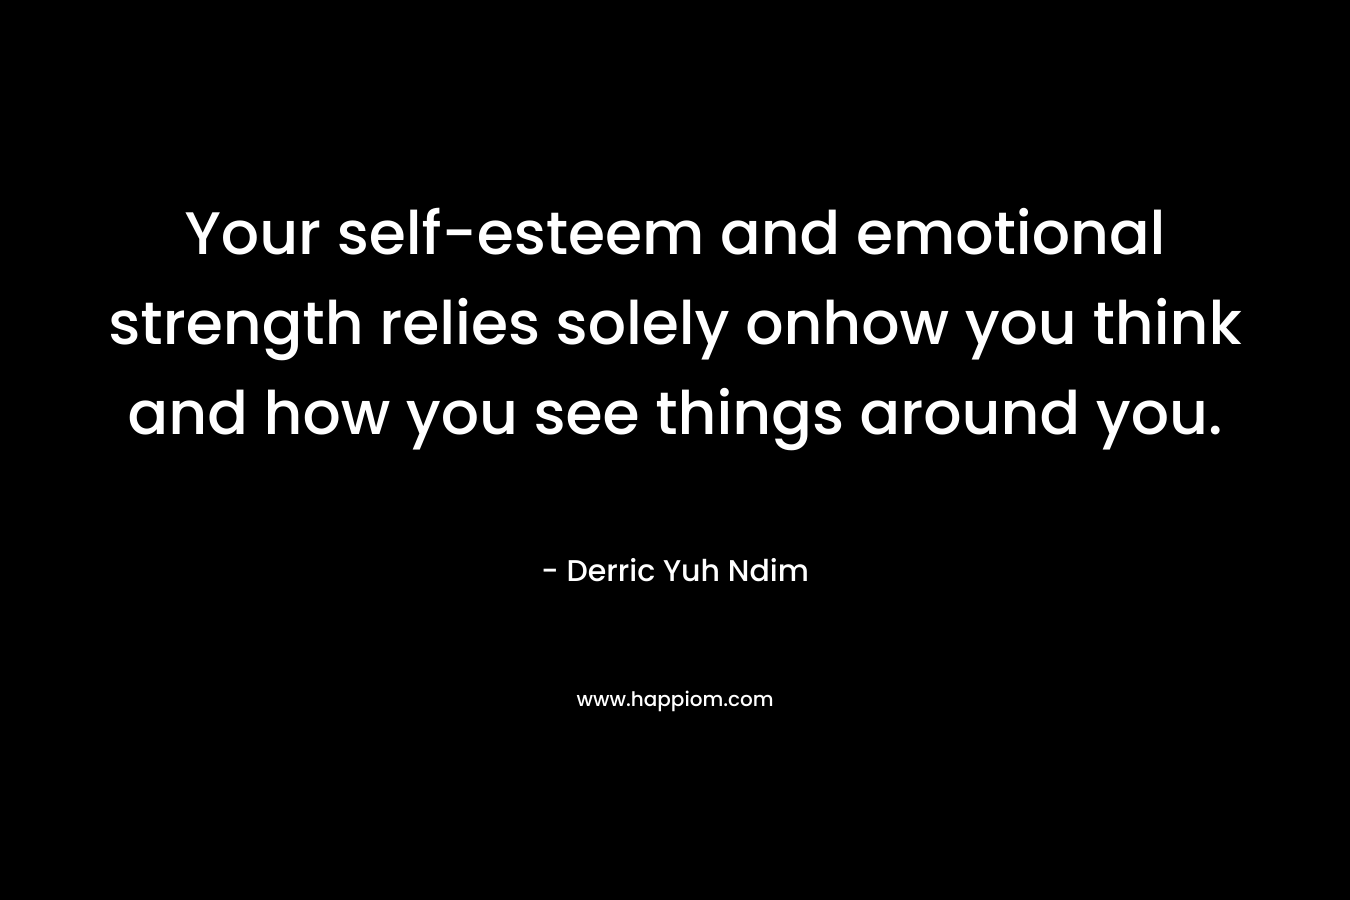 Your self-esteem and emotional strength relies solely onhow you think and how you see things around you. – Derric Yuh Ndim